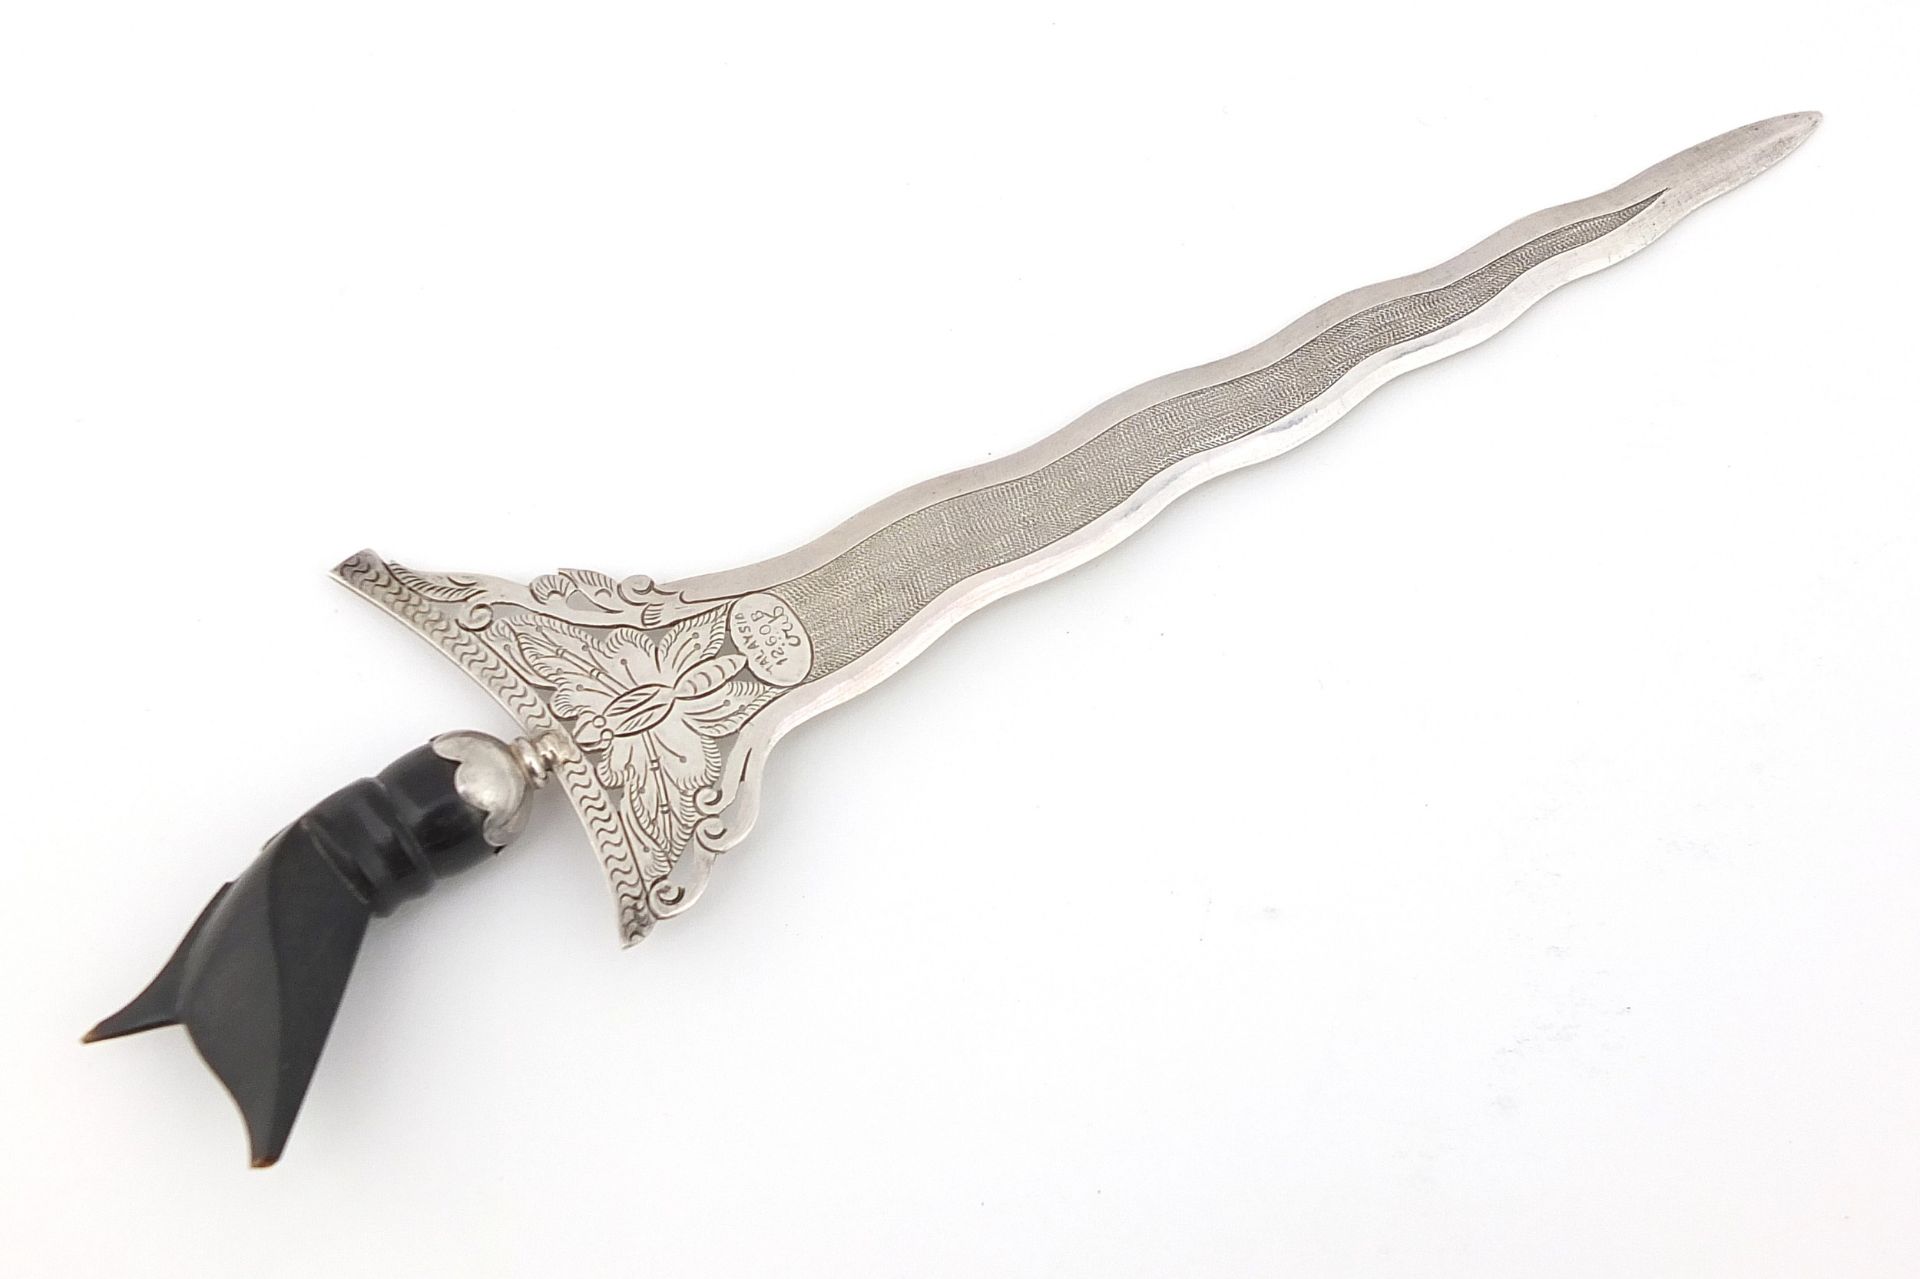 Miniature Malaysian silver Kris with ebonised handle, engraved Malaysia 1260B, 20cm in length, 27.7g - Image 3 of 5